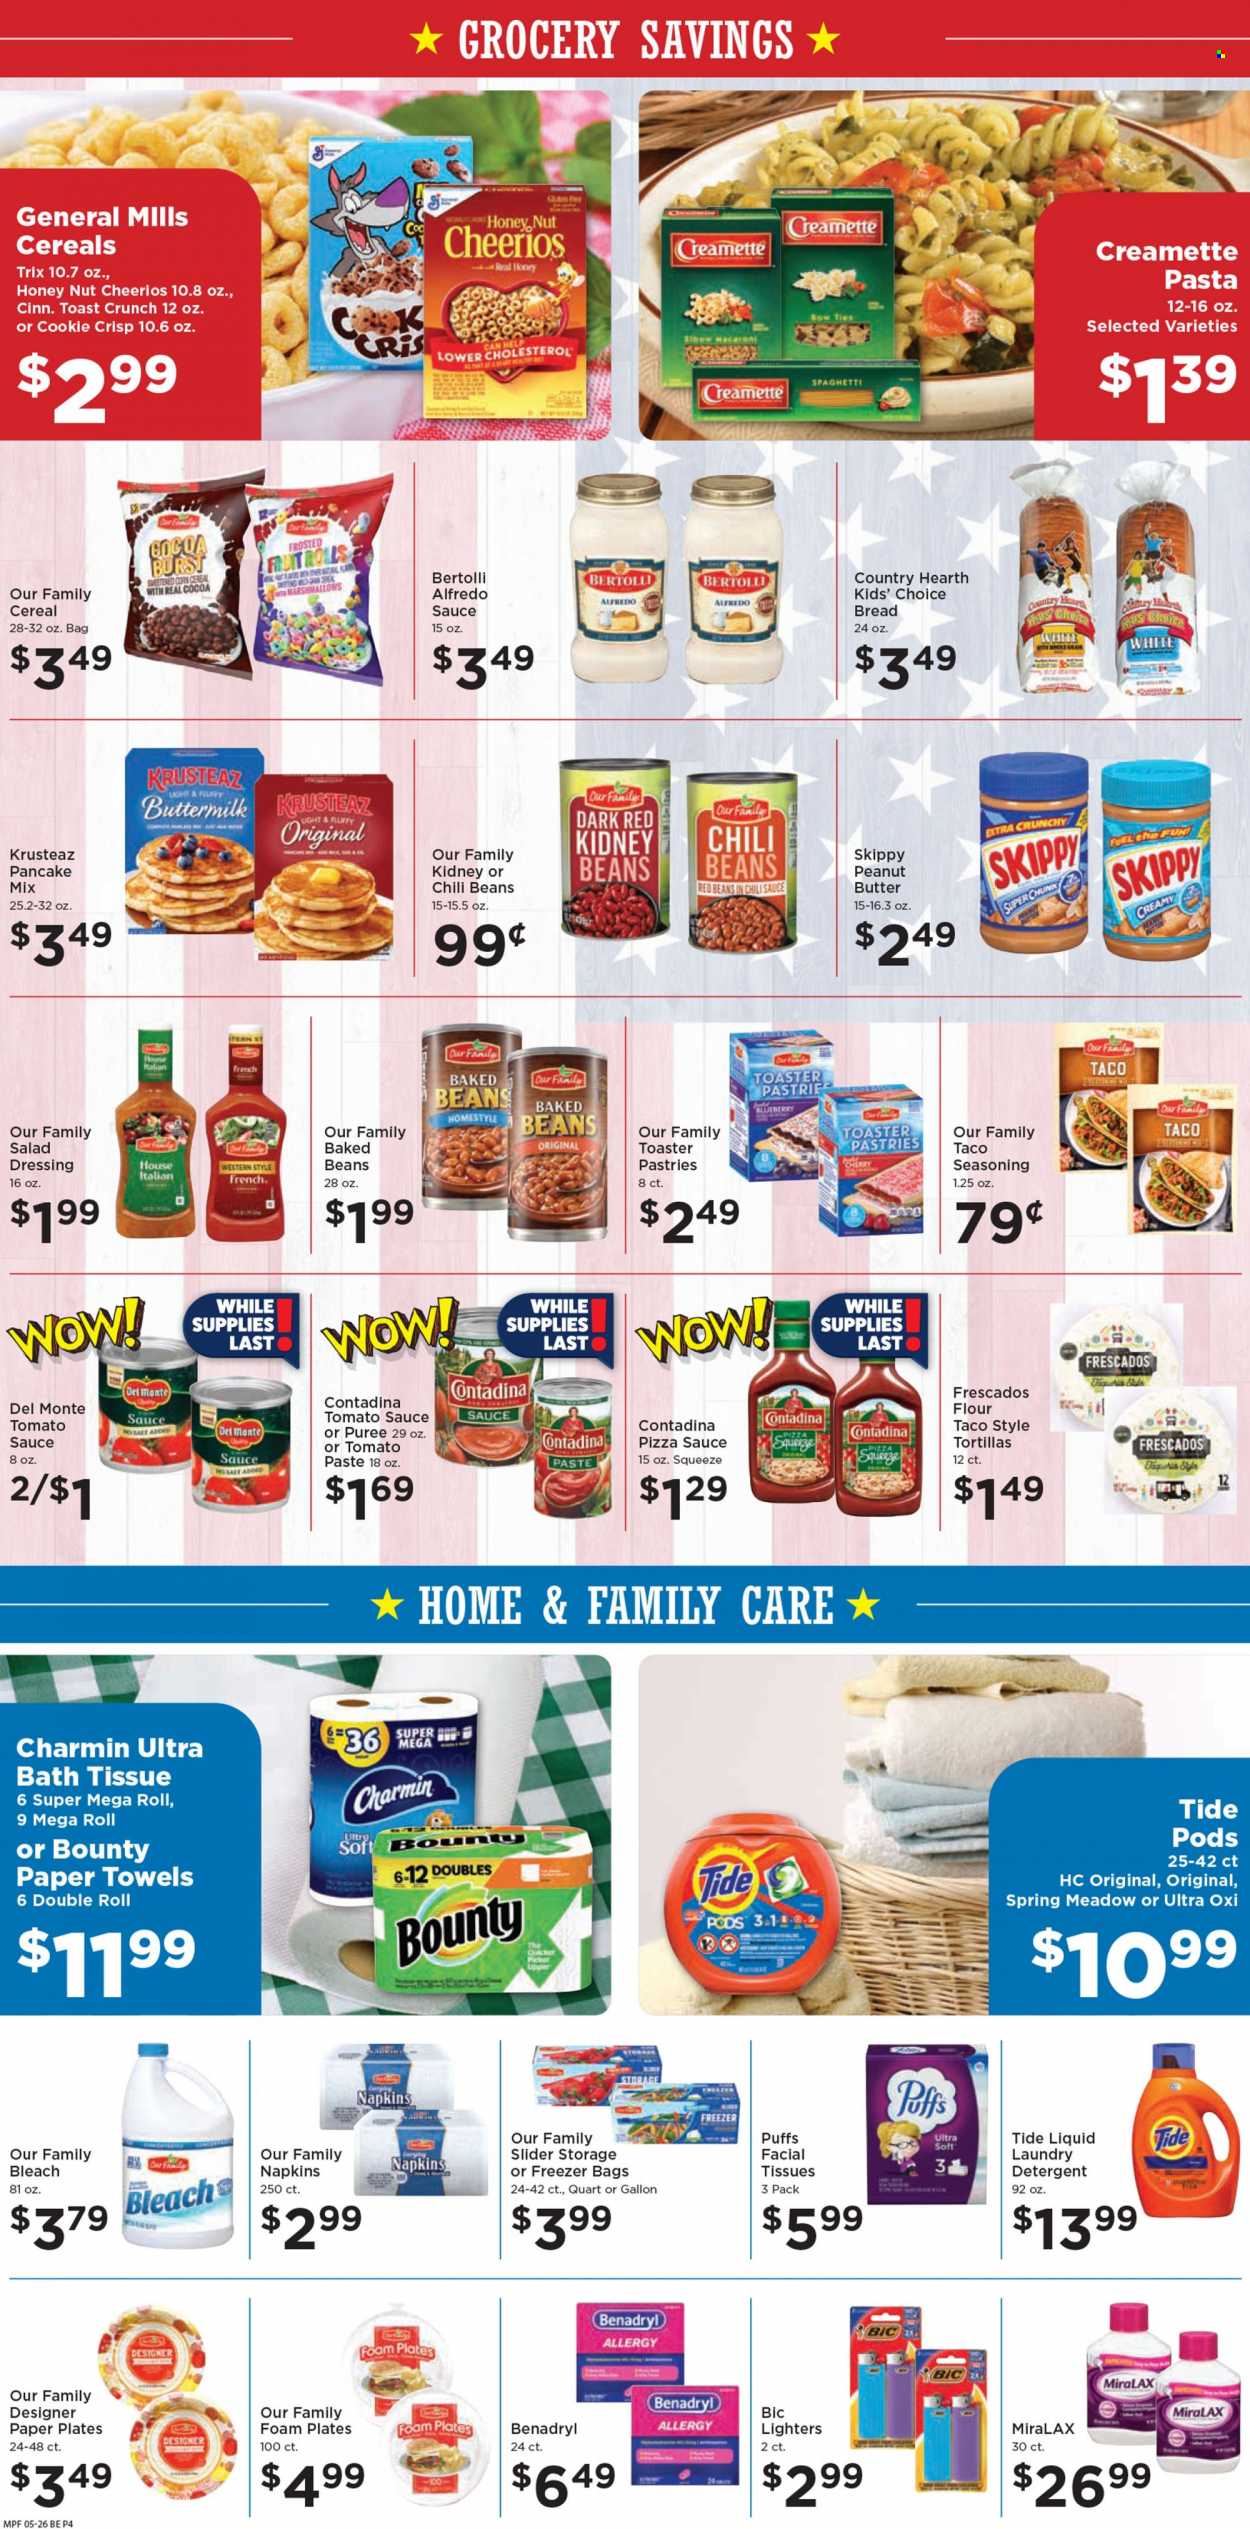 thumbnail - Marketplace Foods Flyer - 05/26/2023 - 06/01/2023 - Sales products - bread, tortillas, puffs, pancake mix, beans, corn, cherries, spaghetti, macaroni, pasta, Alfredo sauce, Bertolli, buttermilk, marshmallows, Bounty, fruit rolls, General Mills, cocoa, red beans, tomato paste, tomato sauce, kidney beans, chili beans, baked beans, Del Monte, cereals, Cheerios, Trix, Creamette, spice, salad dressing, chilli sauce, dressing, peanut butter. Page 4.